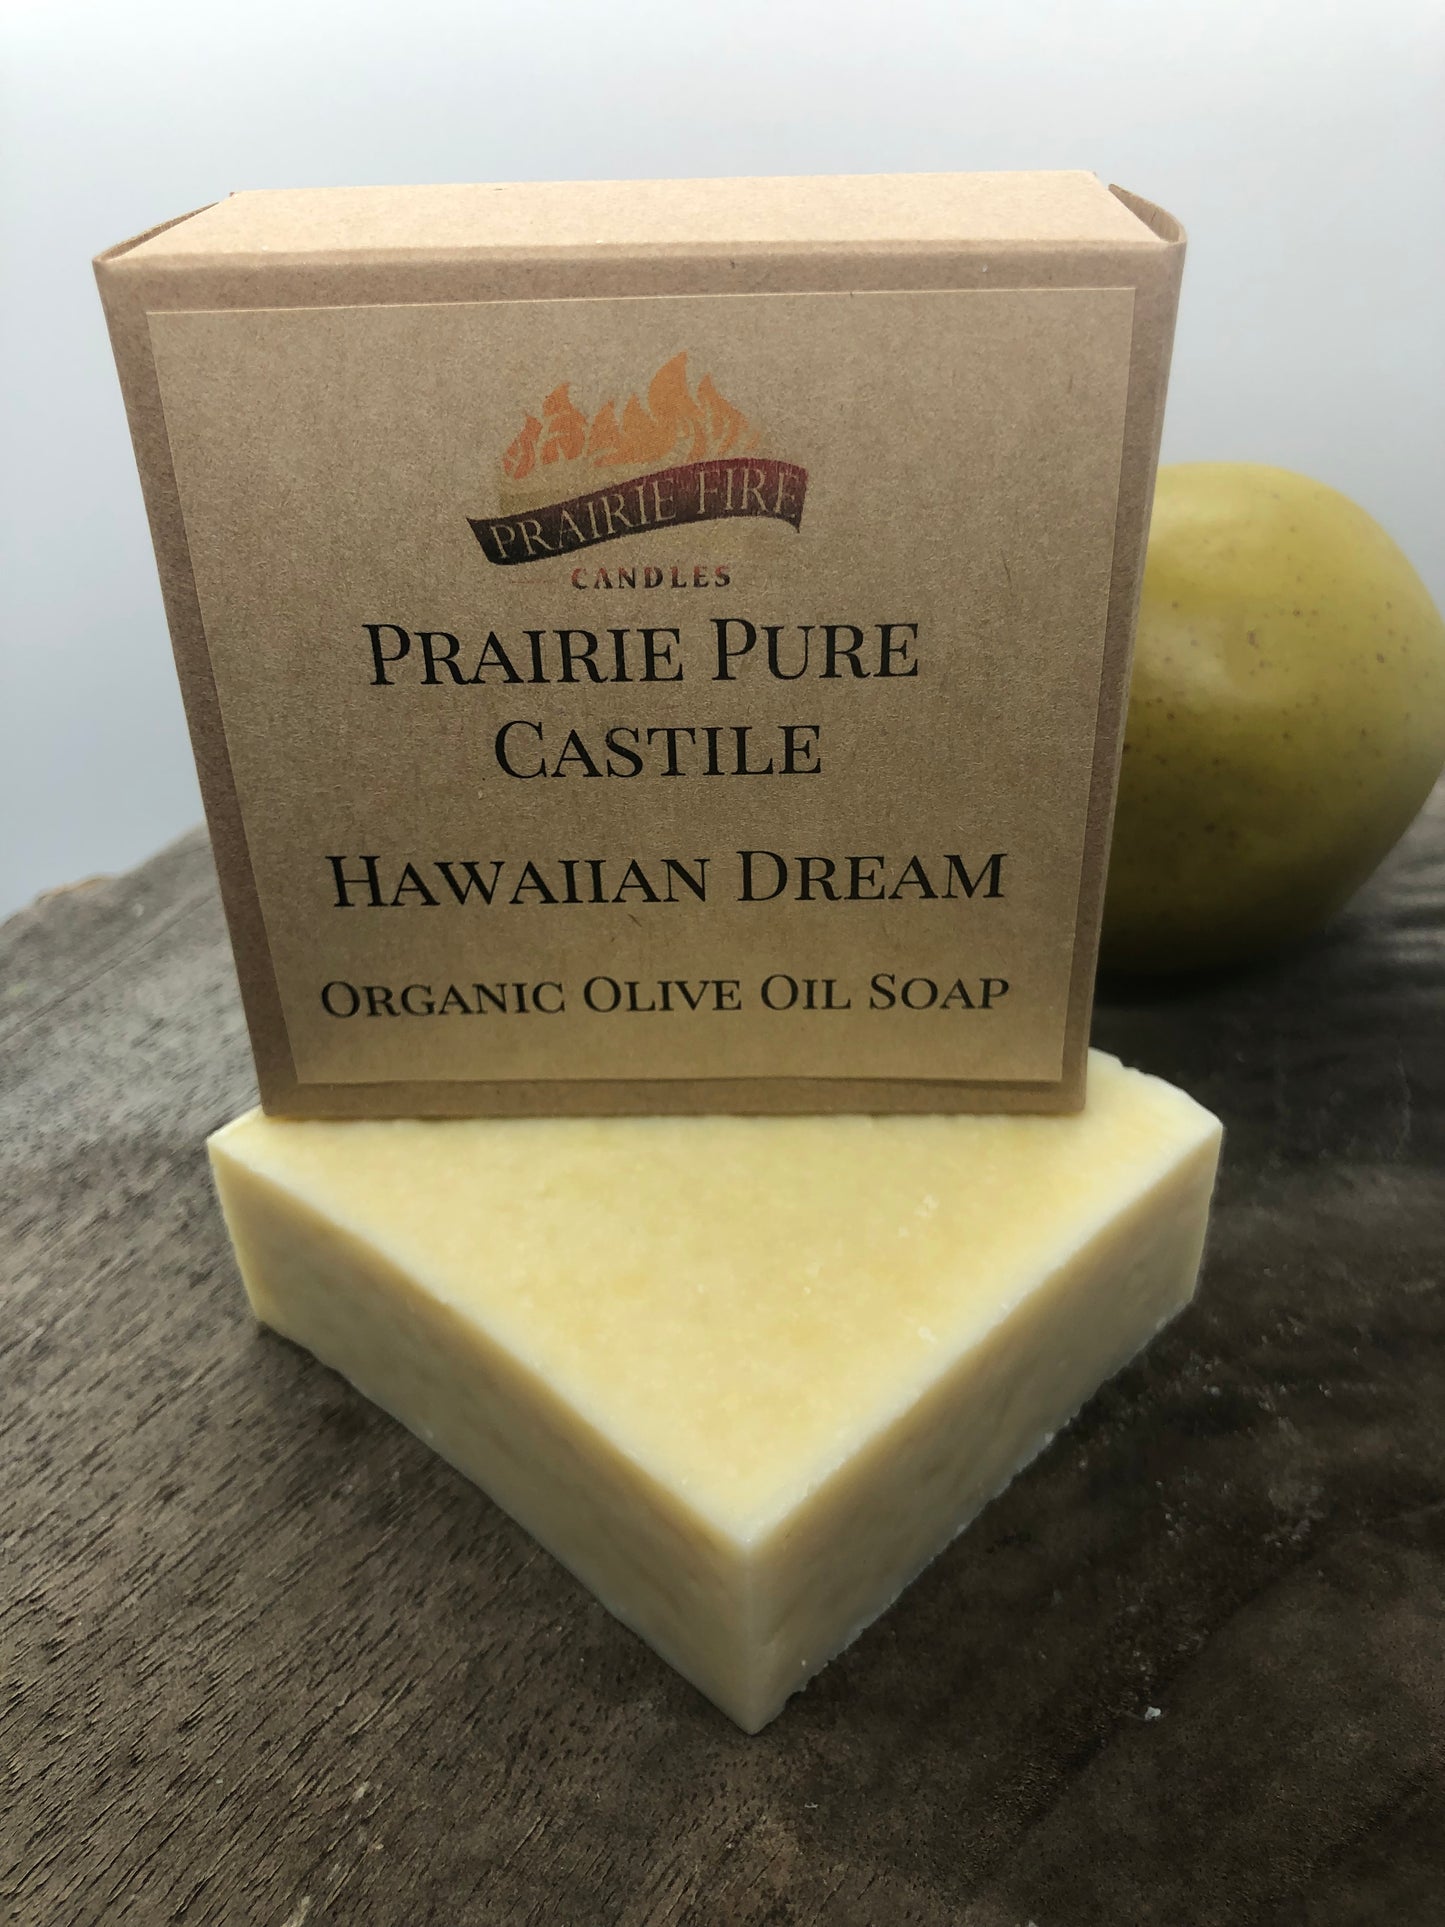 Hawaiian Dream Real Castile Organic Olive Oil Soap for Sensitive Skin - Dye Free - 100% Certified Organic Extra Virgin Olive Oil - Prairie Fire Candles